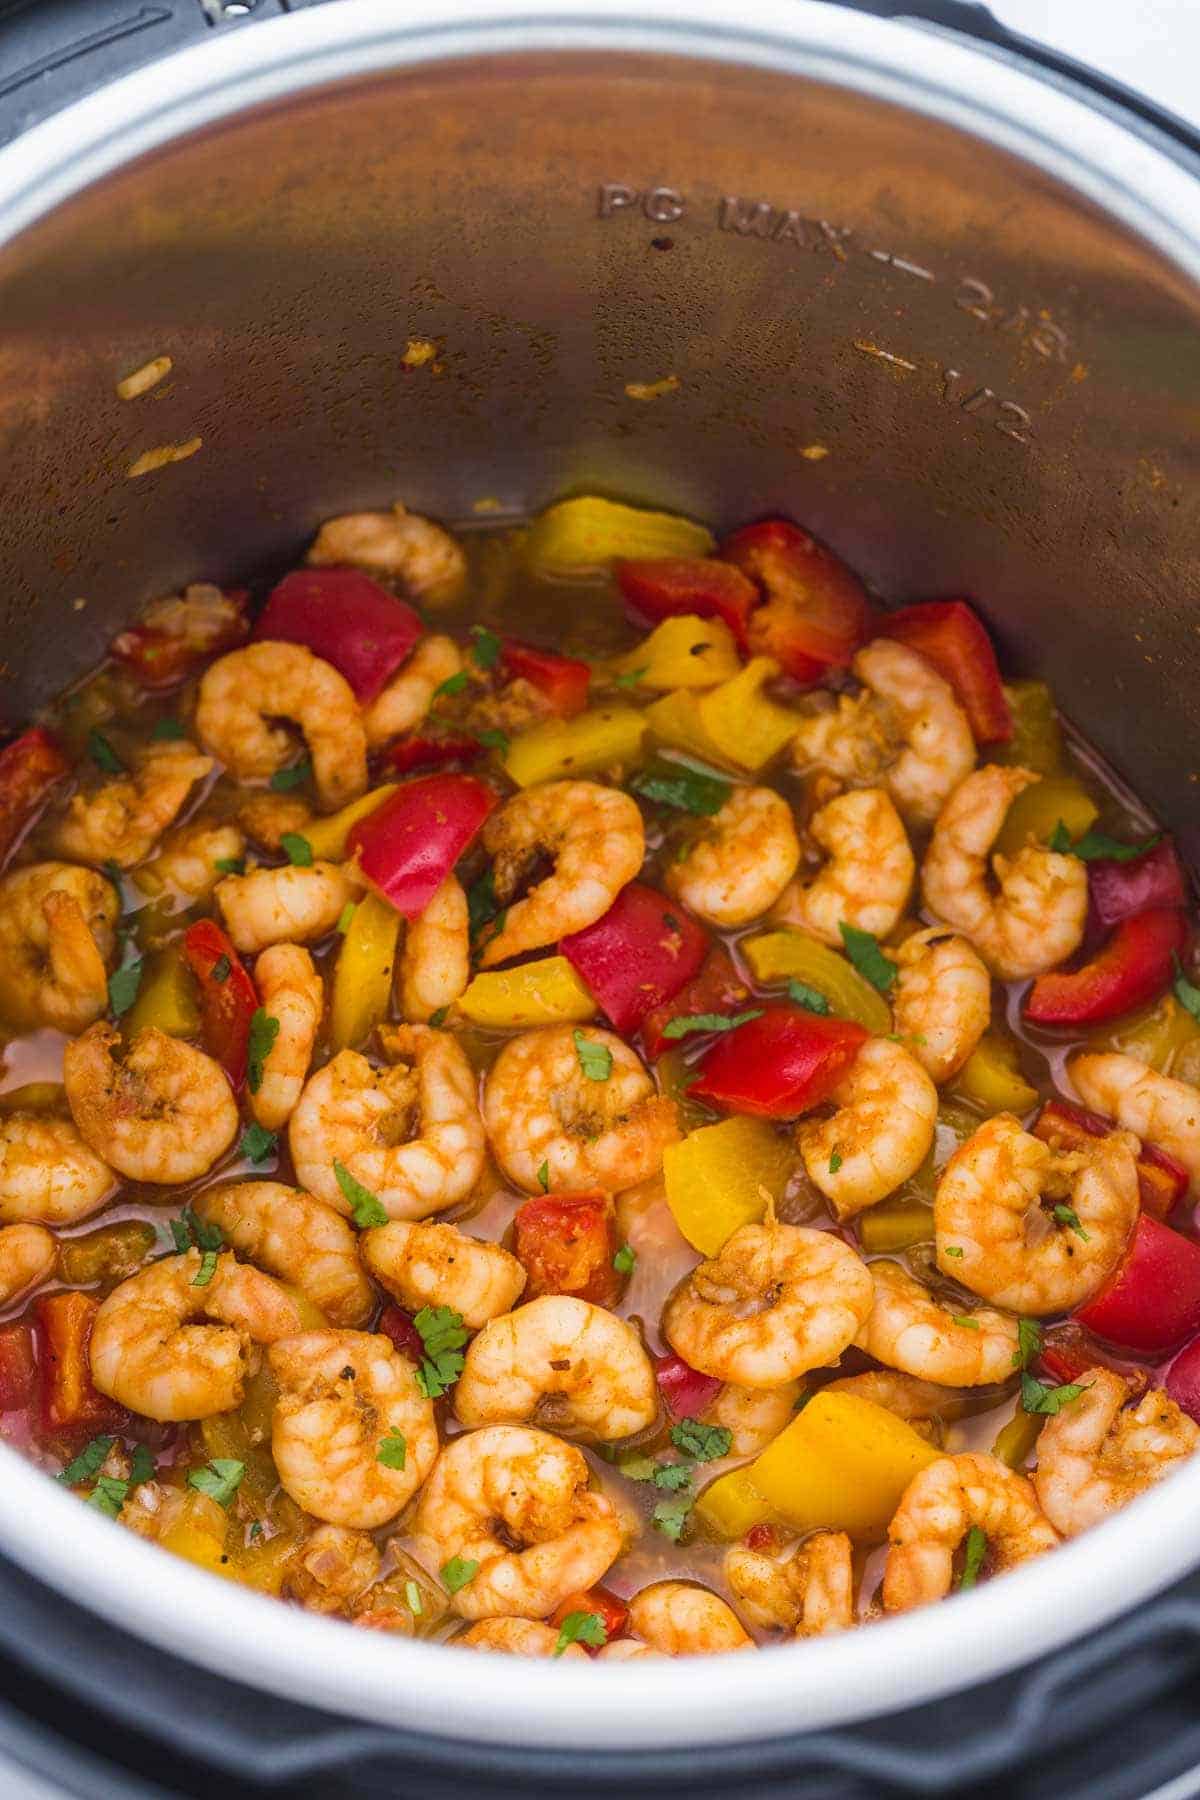 Spicy Cajun Pepper Shrimp garnished with fresh parsley leaves in the Instant Pot